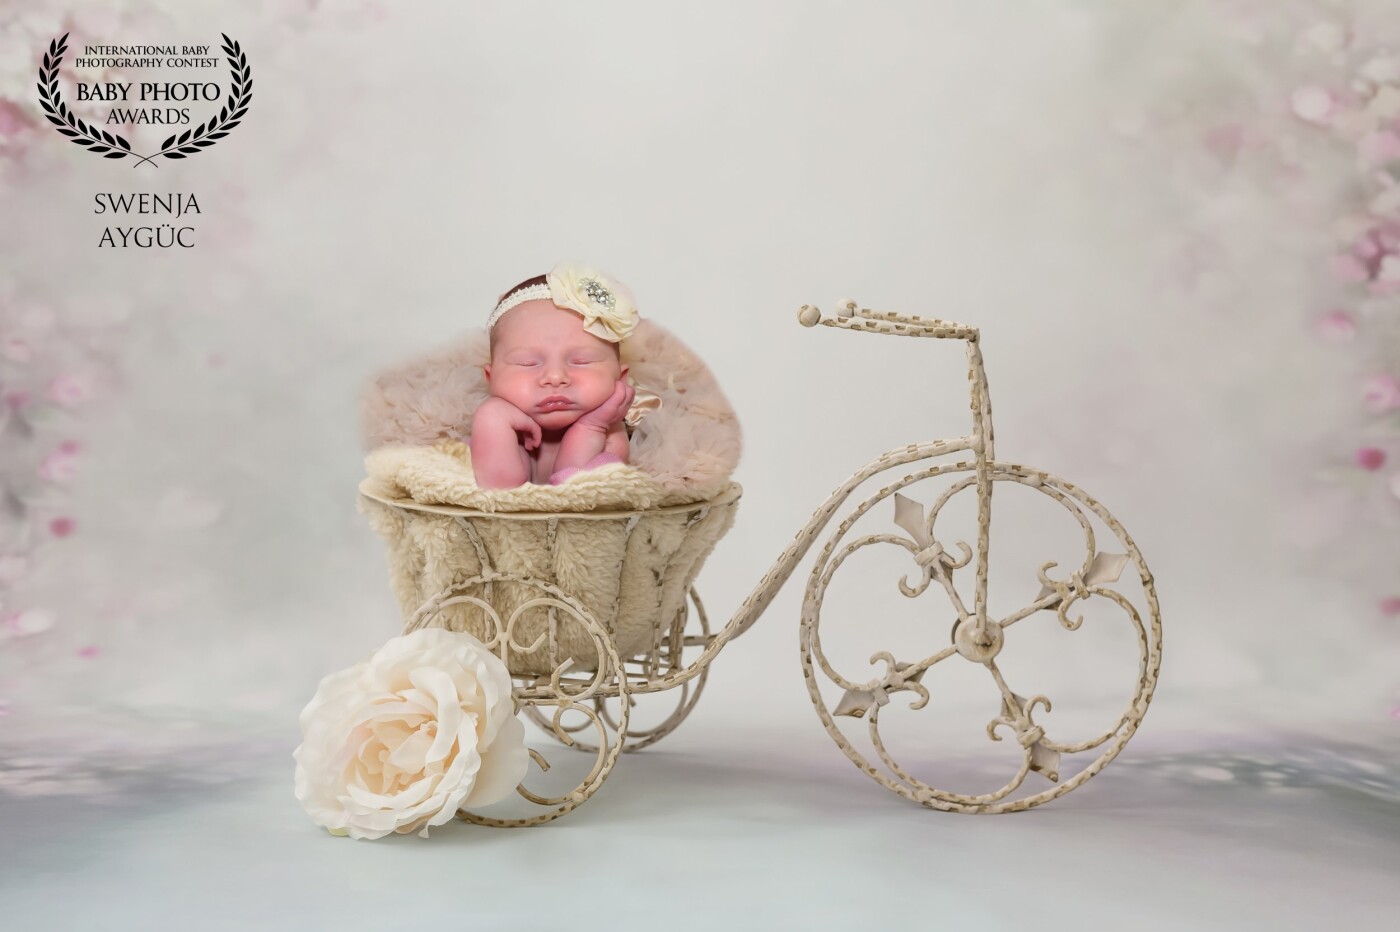 Hallo ich i'm a baby photographer and I'm very proud to show you my work. I'm a baby photographer now 4 years long and I'm very happy to that.